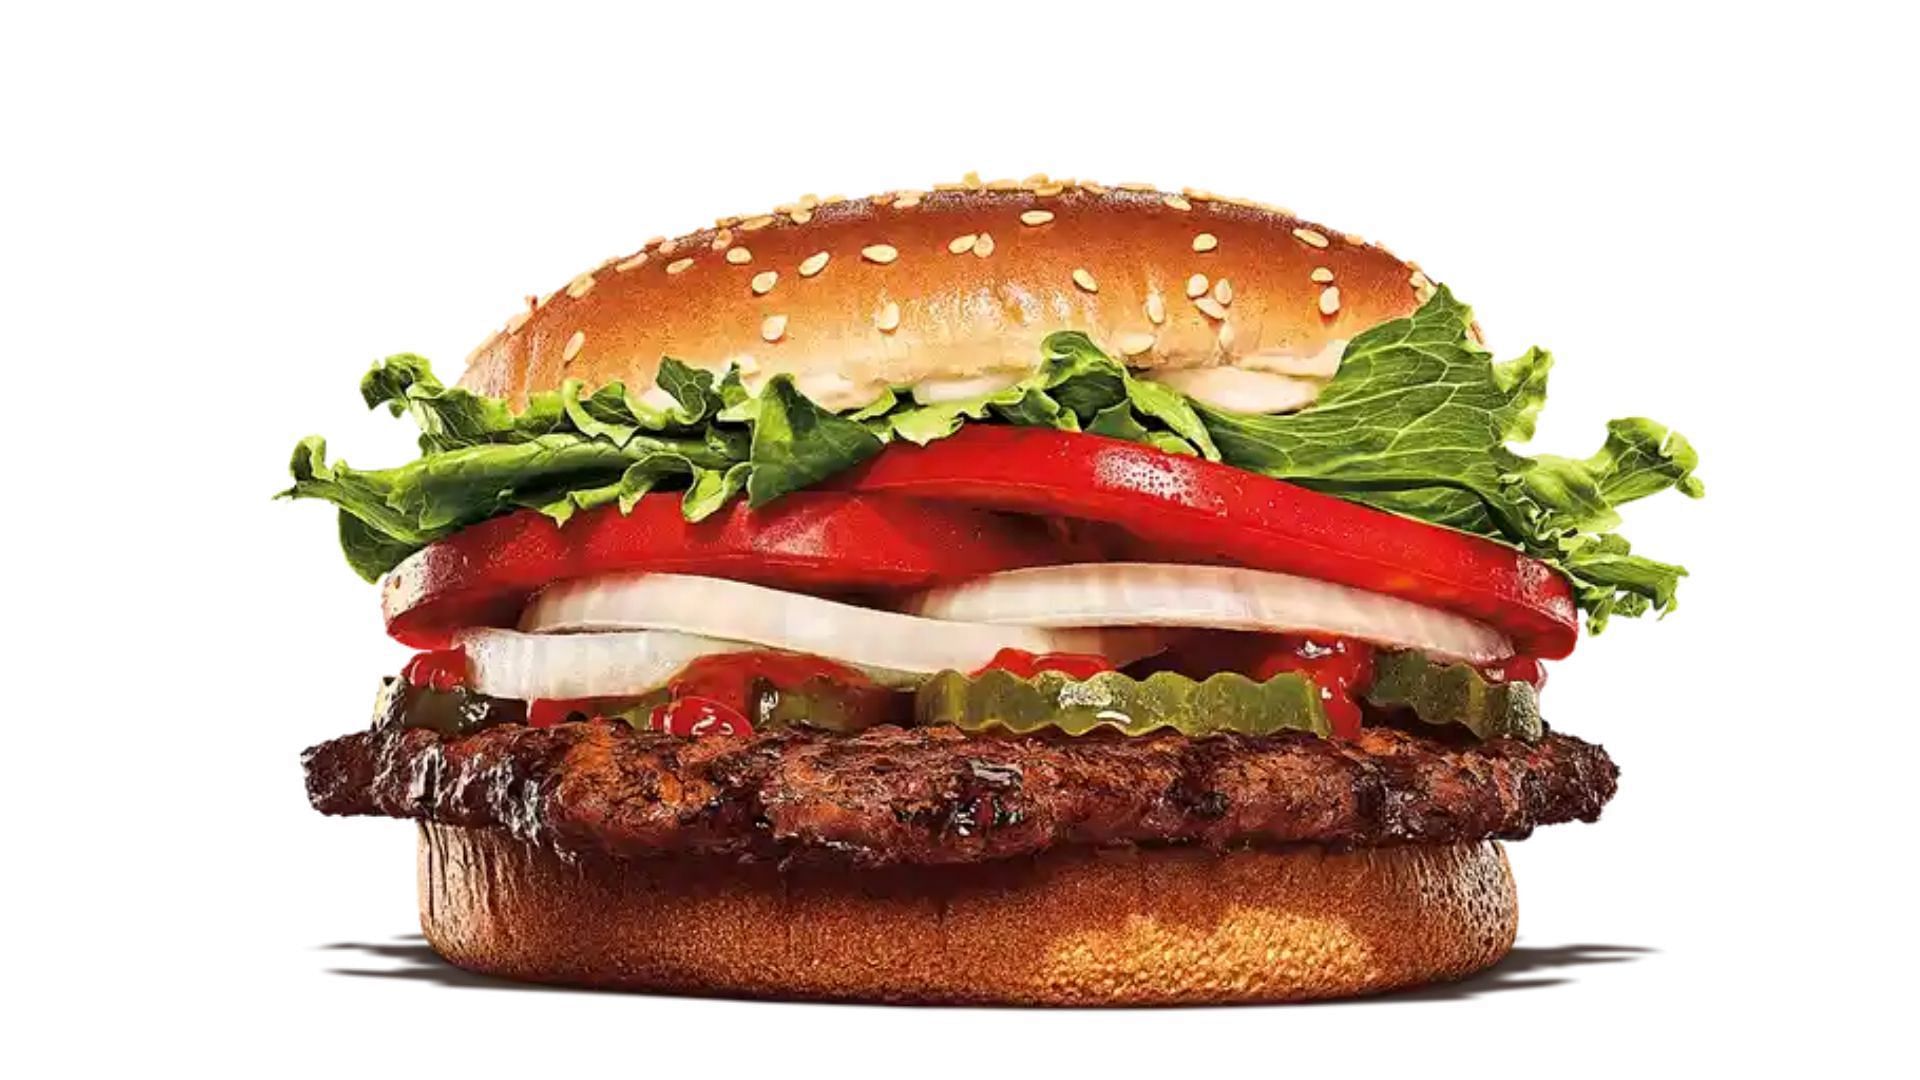 Whopper with a &frac14; lb beef patty (Image via Burger King)